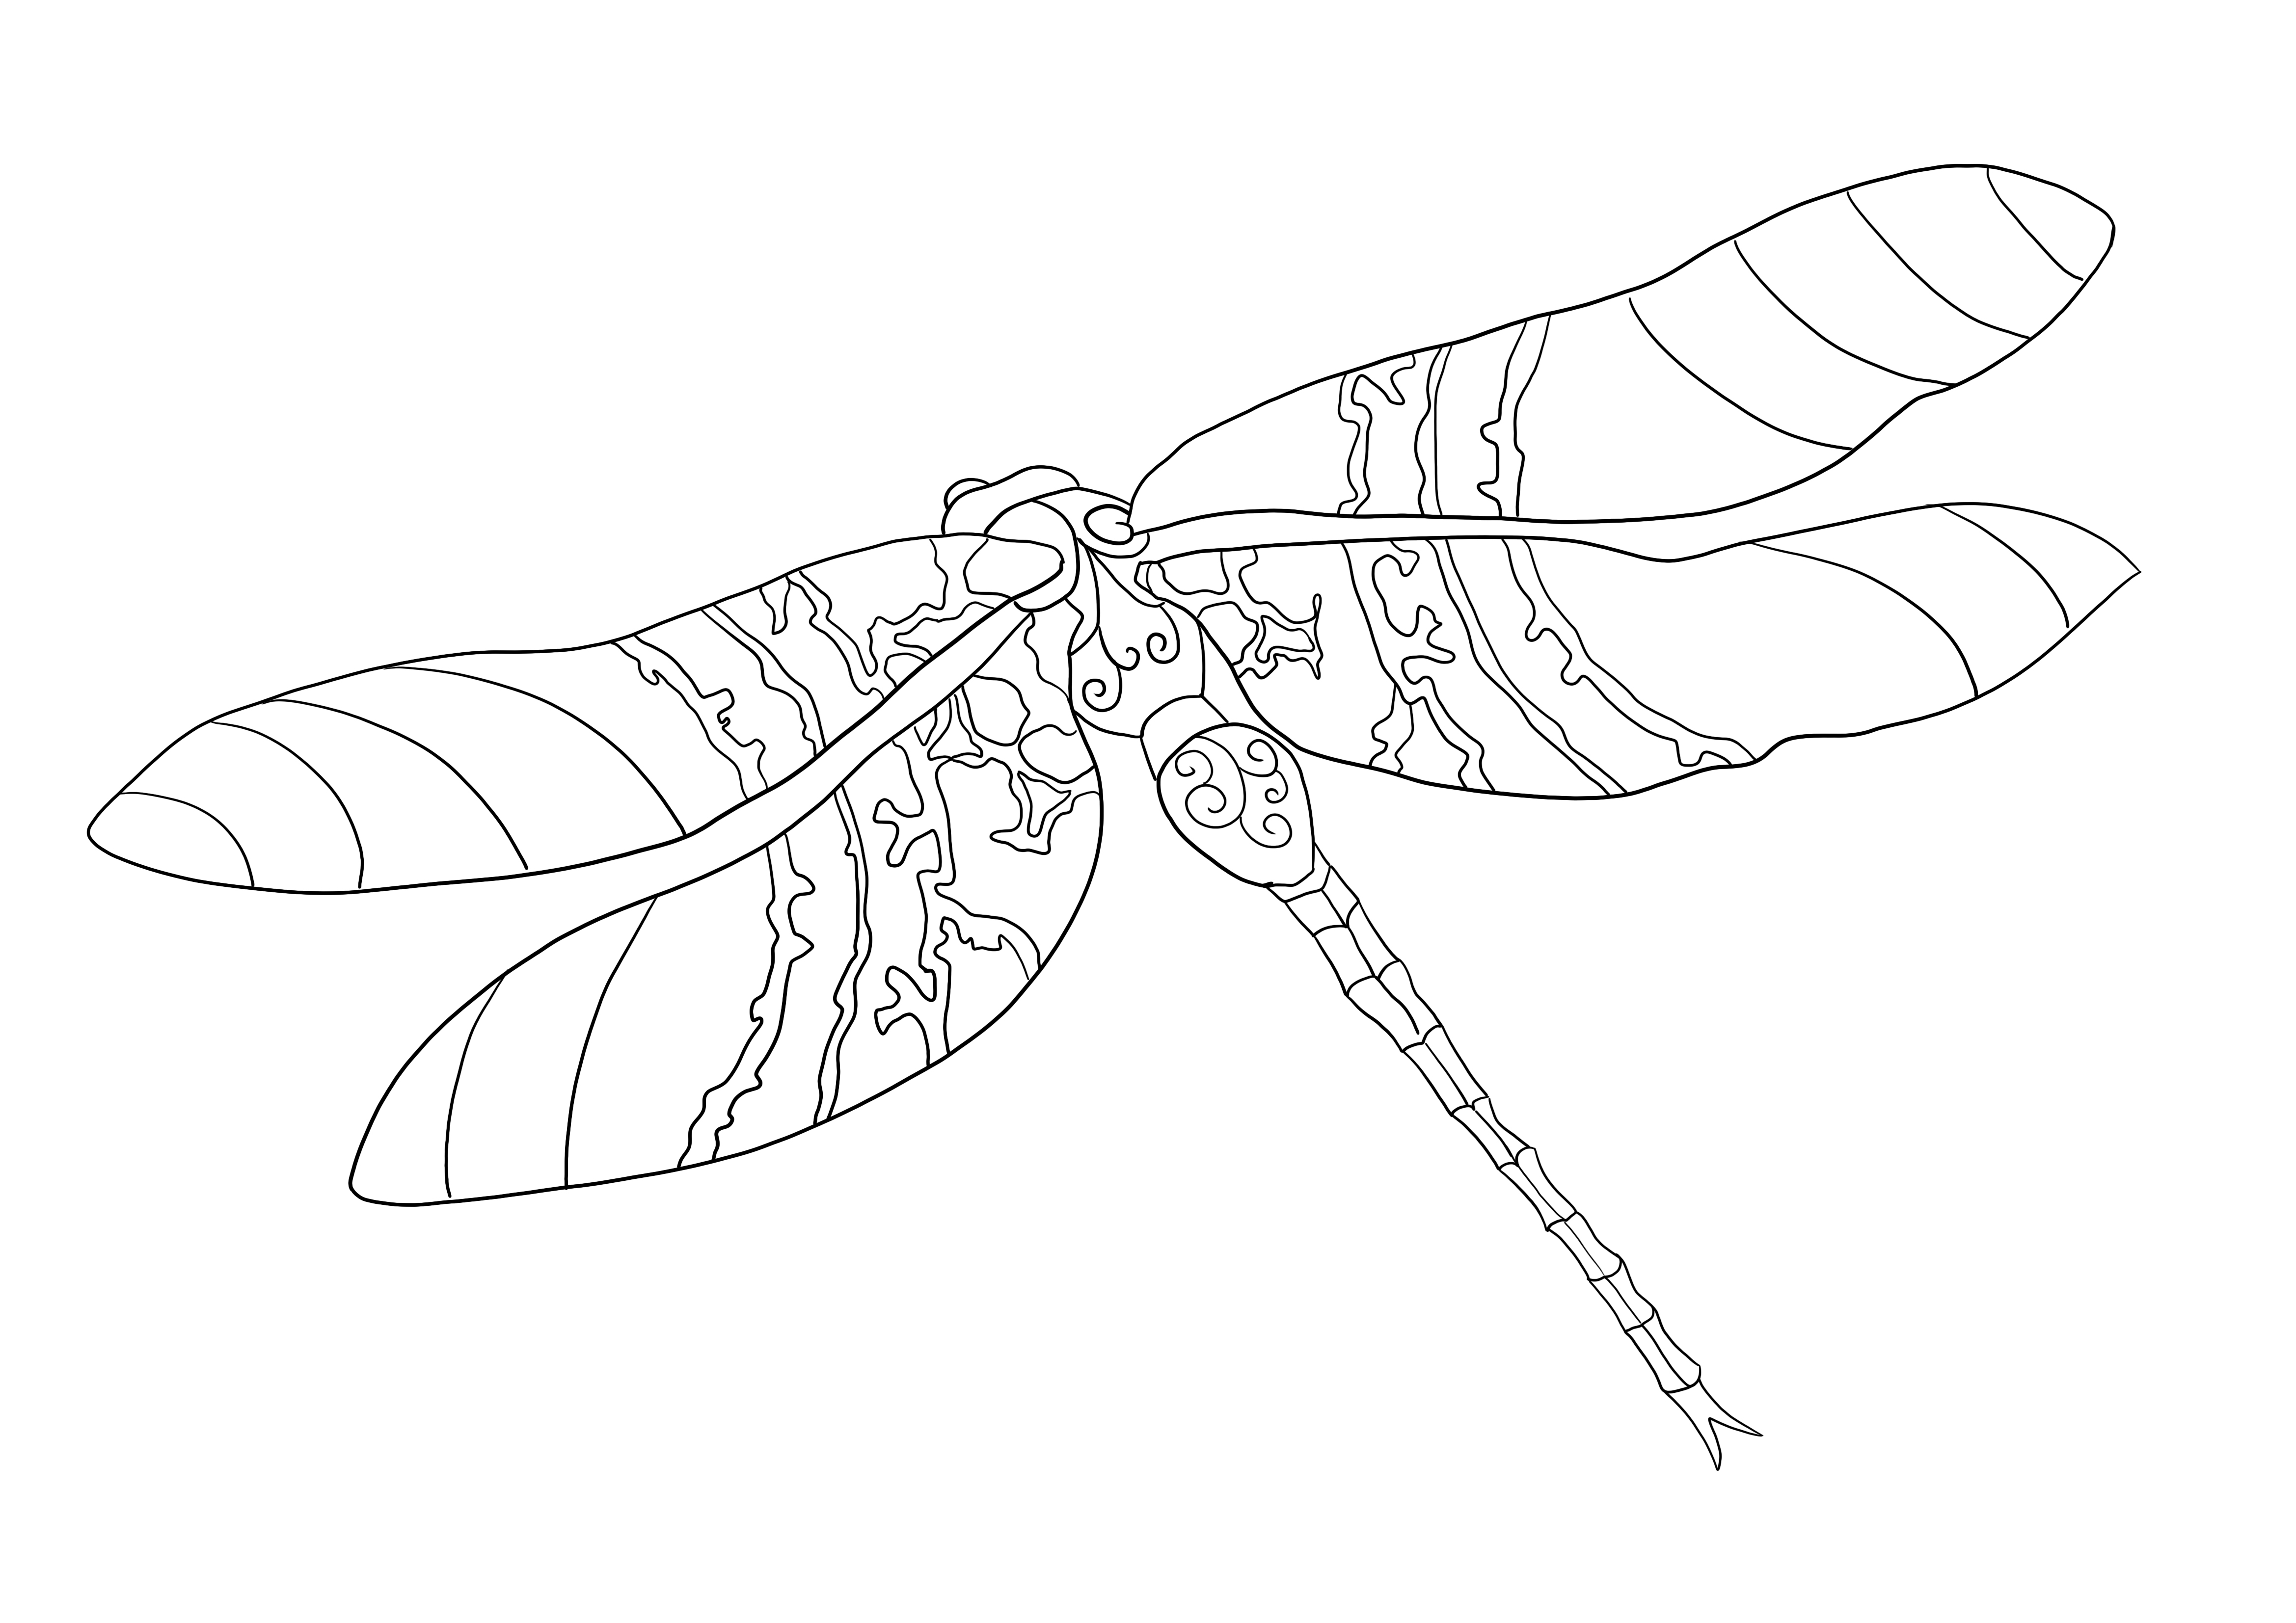 dragonfly-free-printing-and-coloring-image